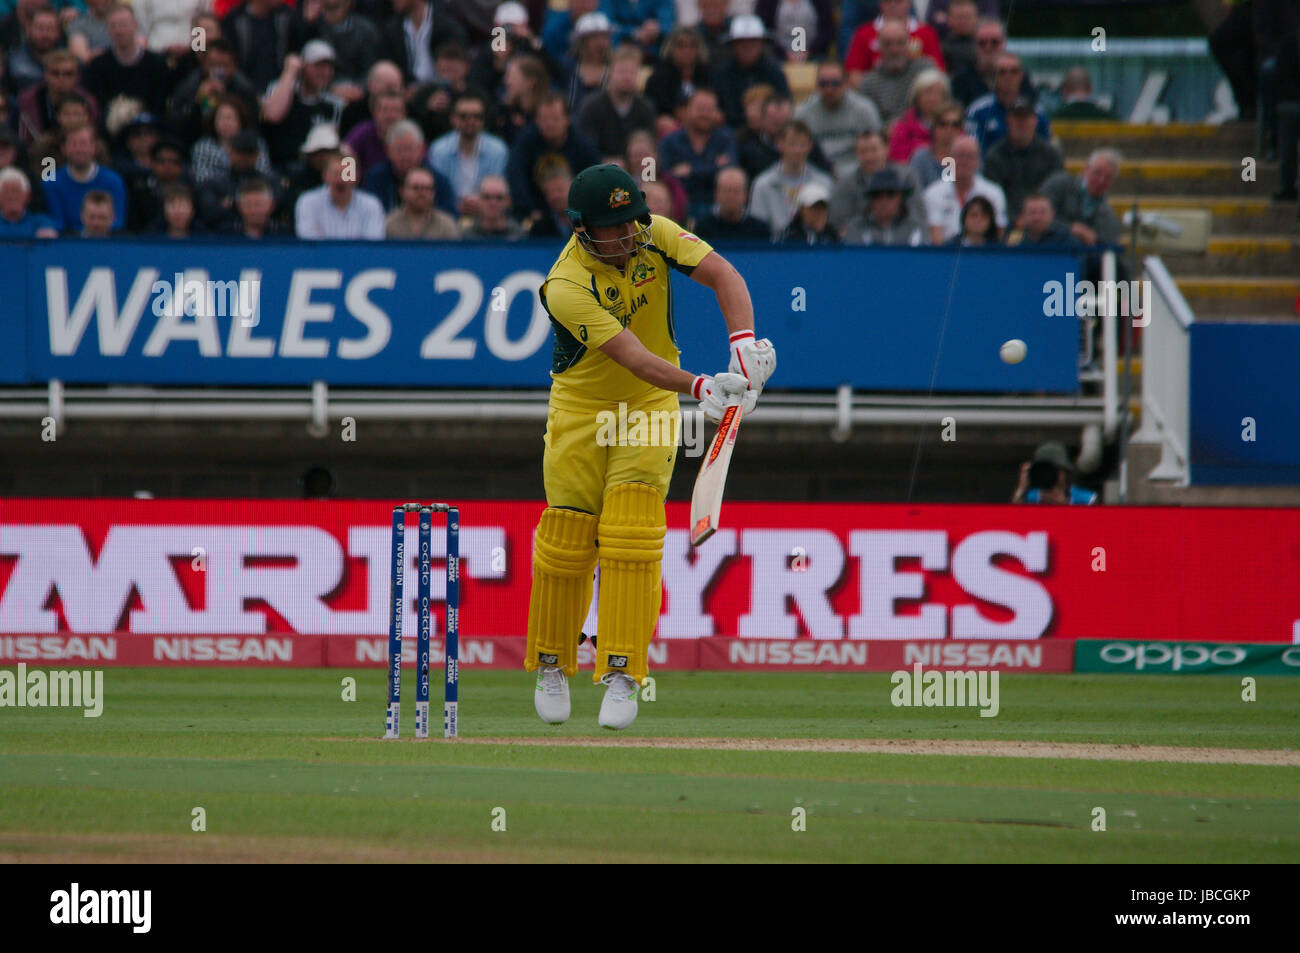 Birmingham, England, 10 June 2017. Aaron Finch batting for Australia against England in the ICC Champions Trophy Group A Match at Edgbaston. Credit: Colin Edwards/Alamy Live News. Stock Photo